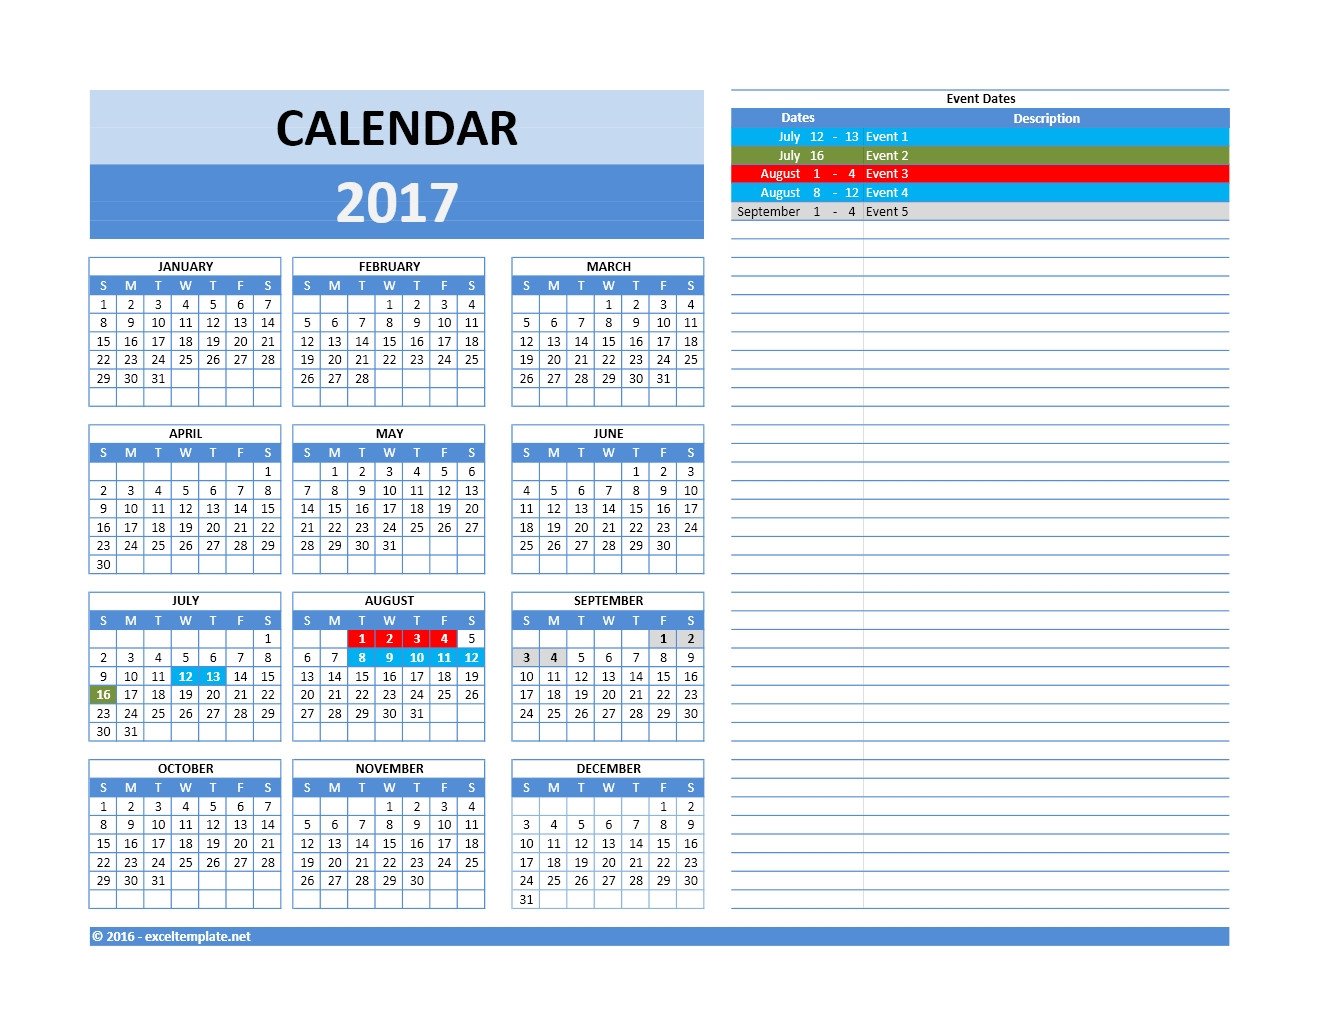 2017 and 2018 Calendars